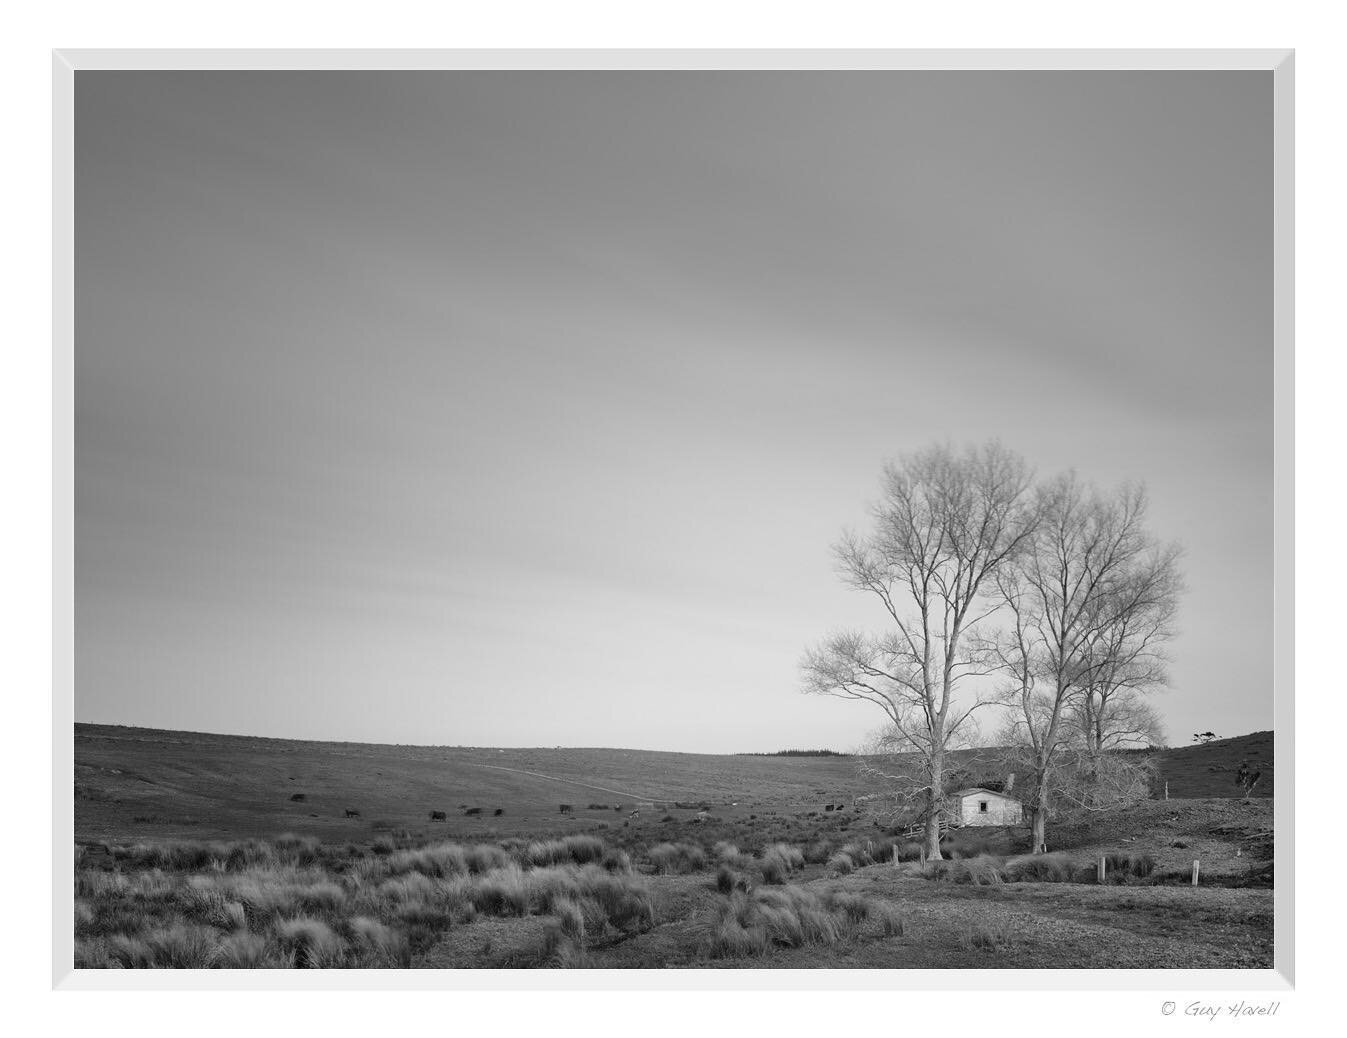 Far Northern New Zealand (2016) &copy; Guy Havell.

#nz #newzealand #newtopographic #bnwphotography #blackandwhitephotography #landscapephotography #fineartphotography #trees #hut #tinyhouse #shack #travel #isolation #bw #monochromatic